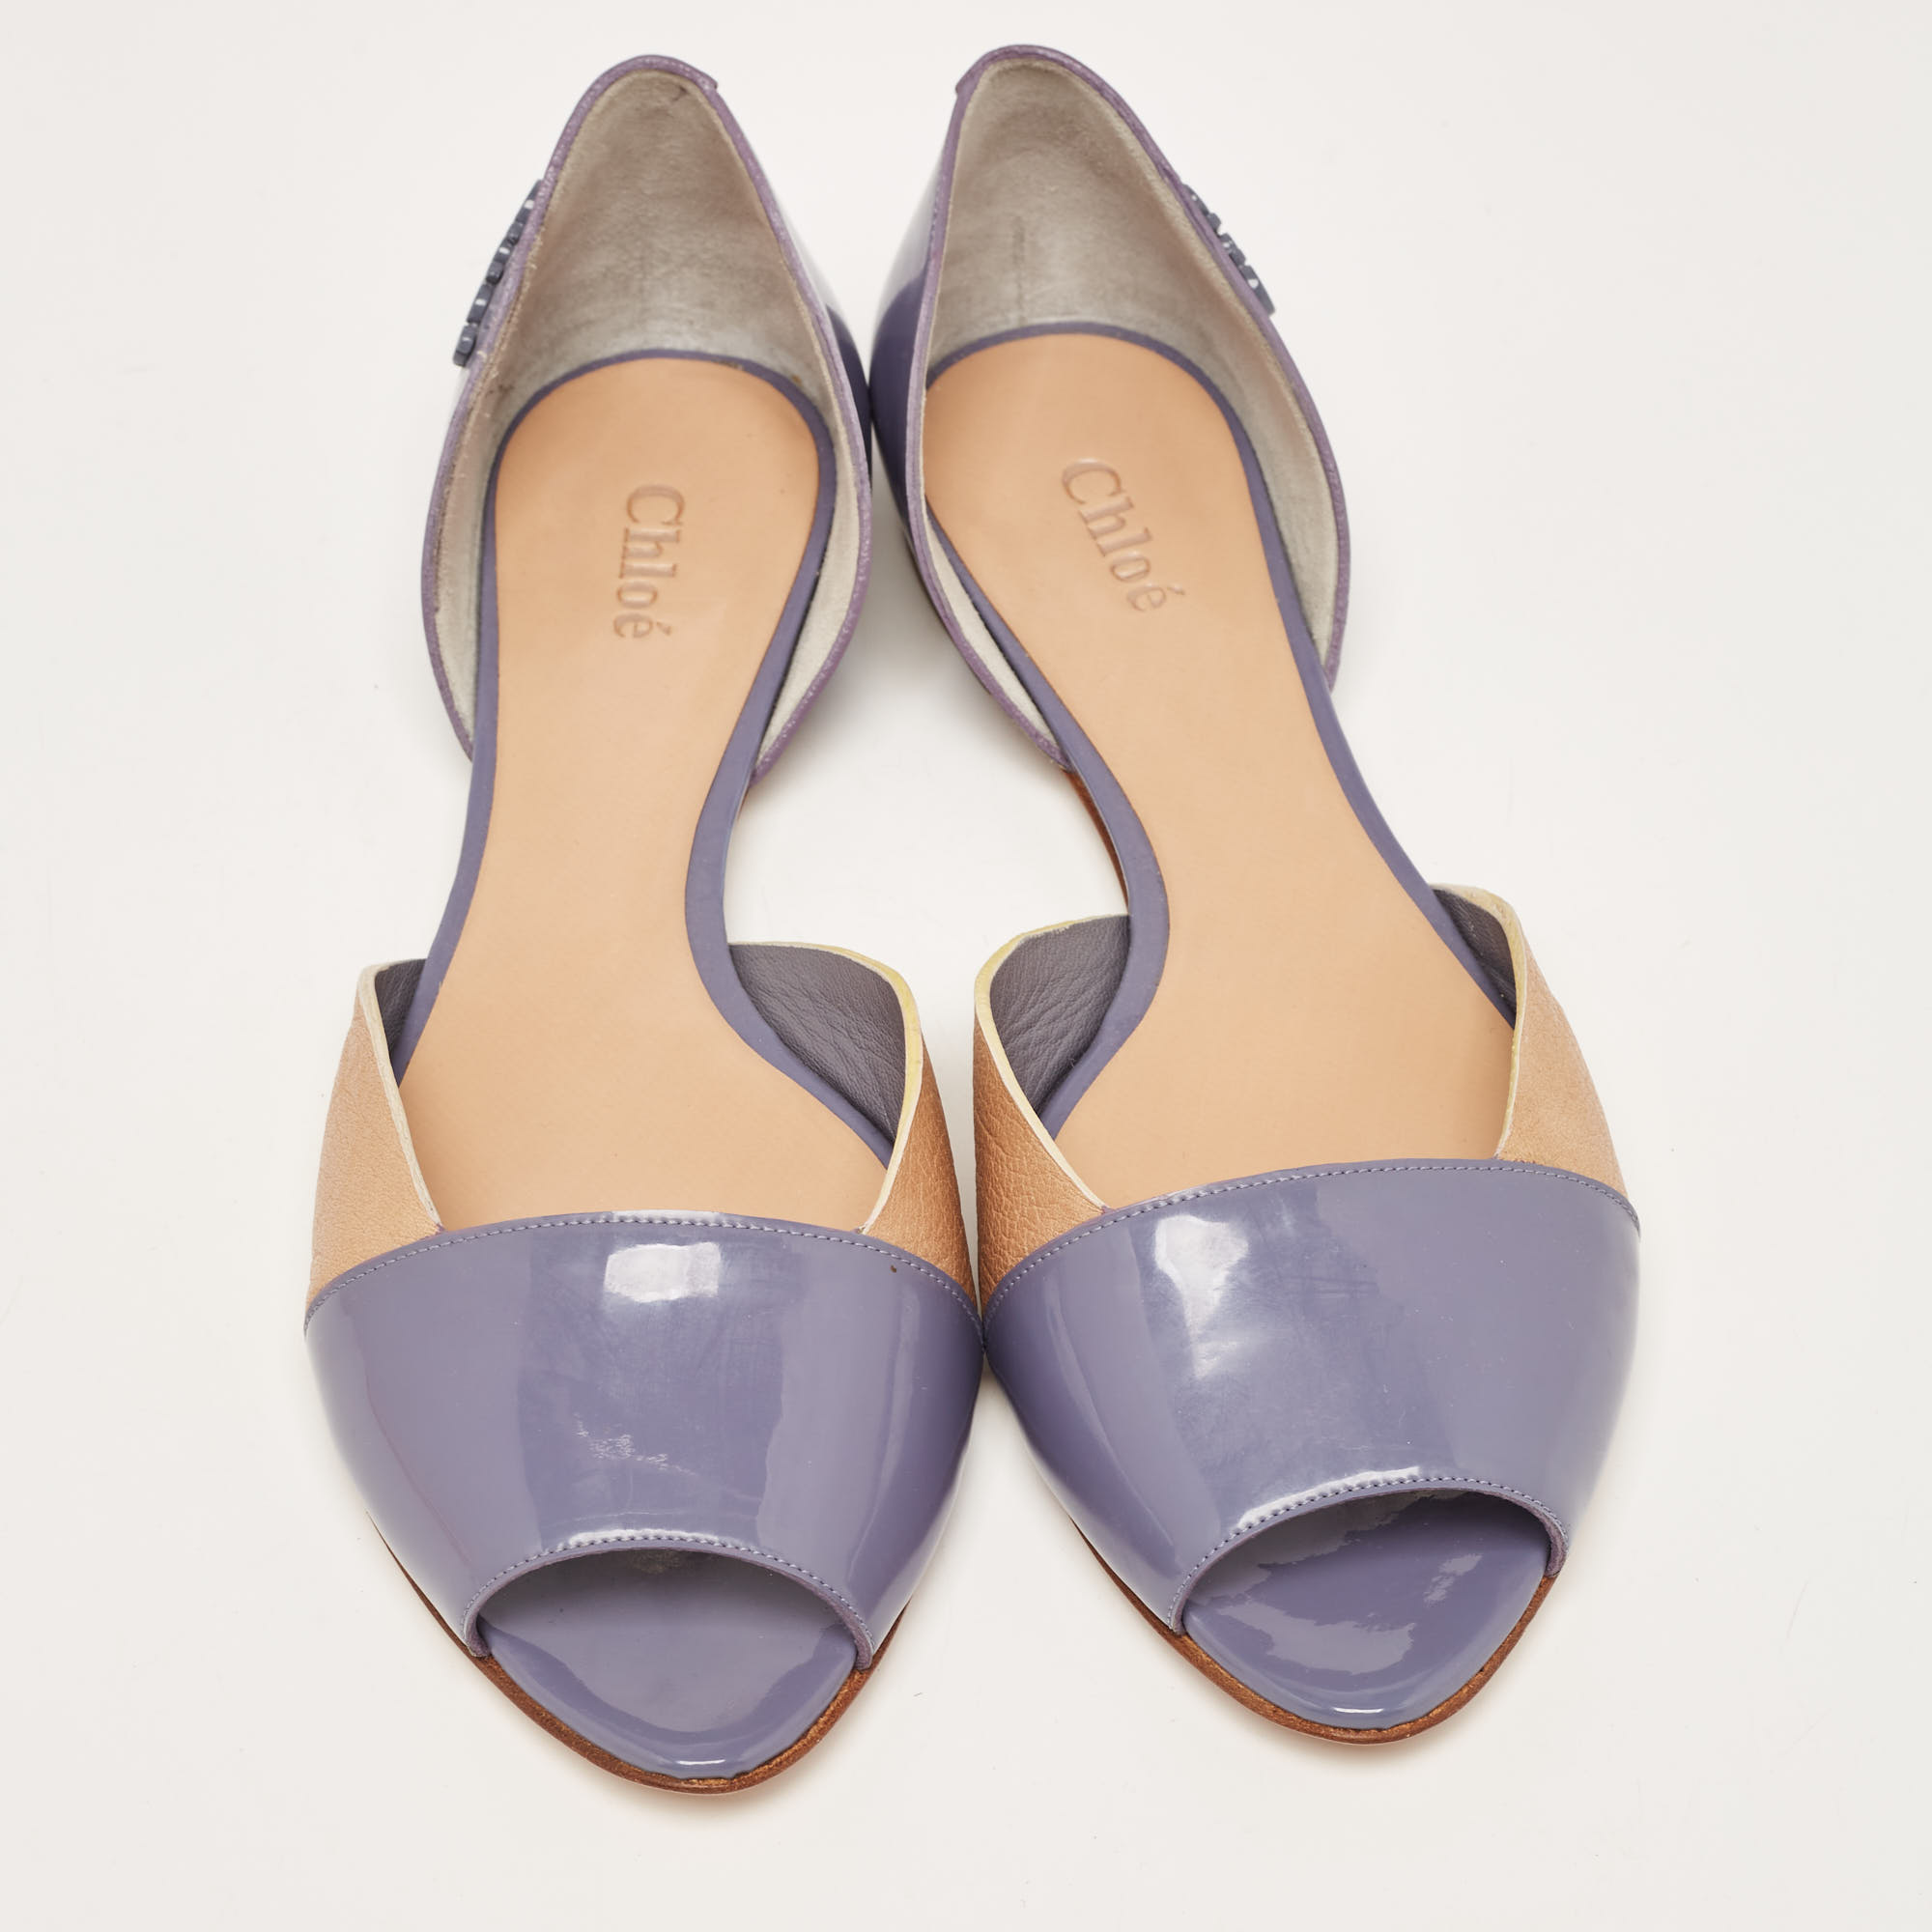 Chloé Blue/Brown Leather Open Toe D'orsay Flats Size 38